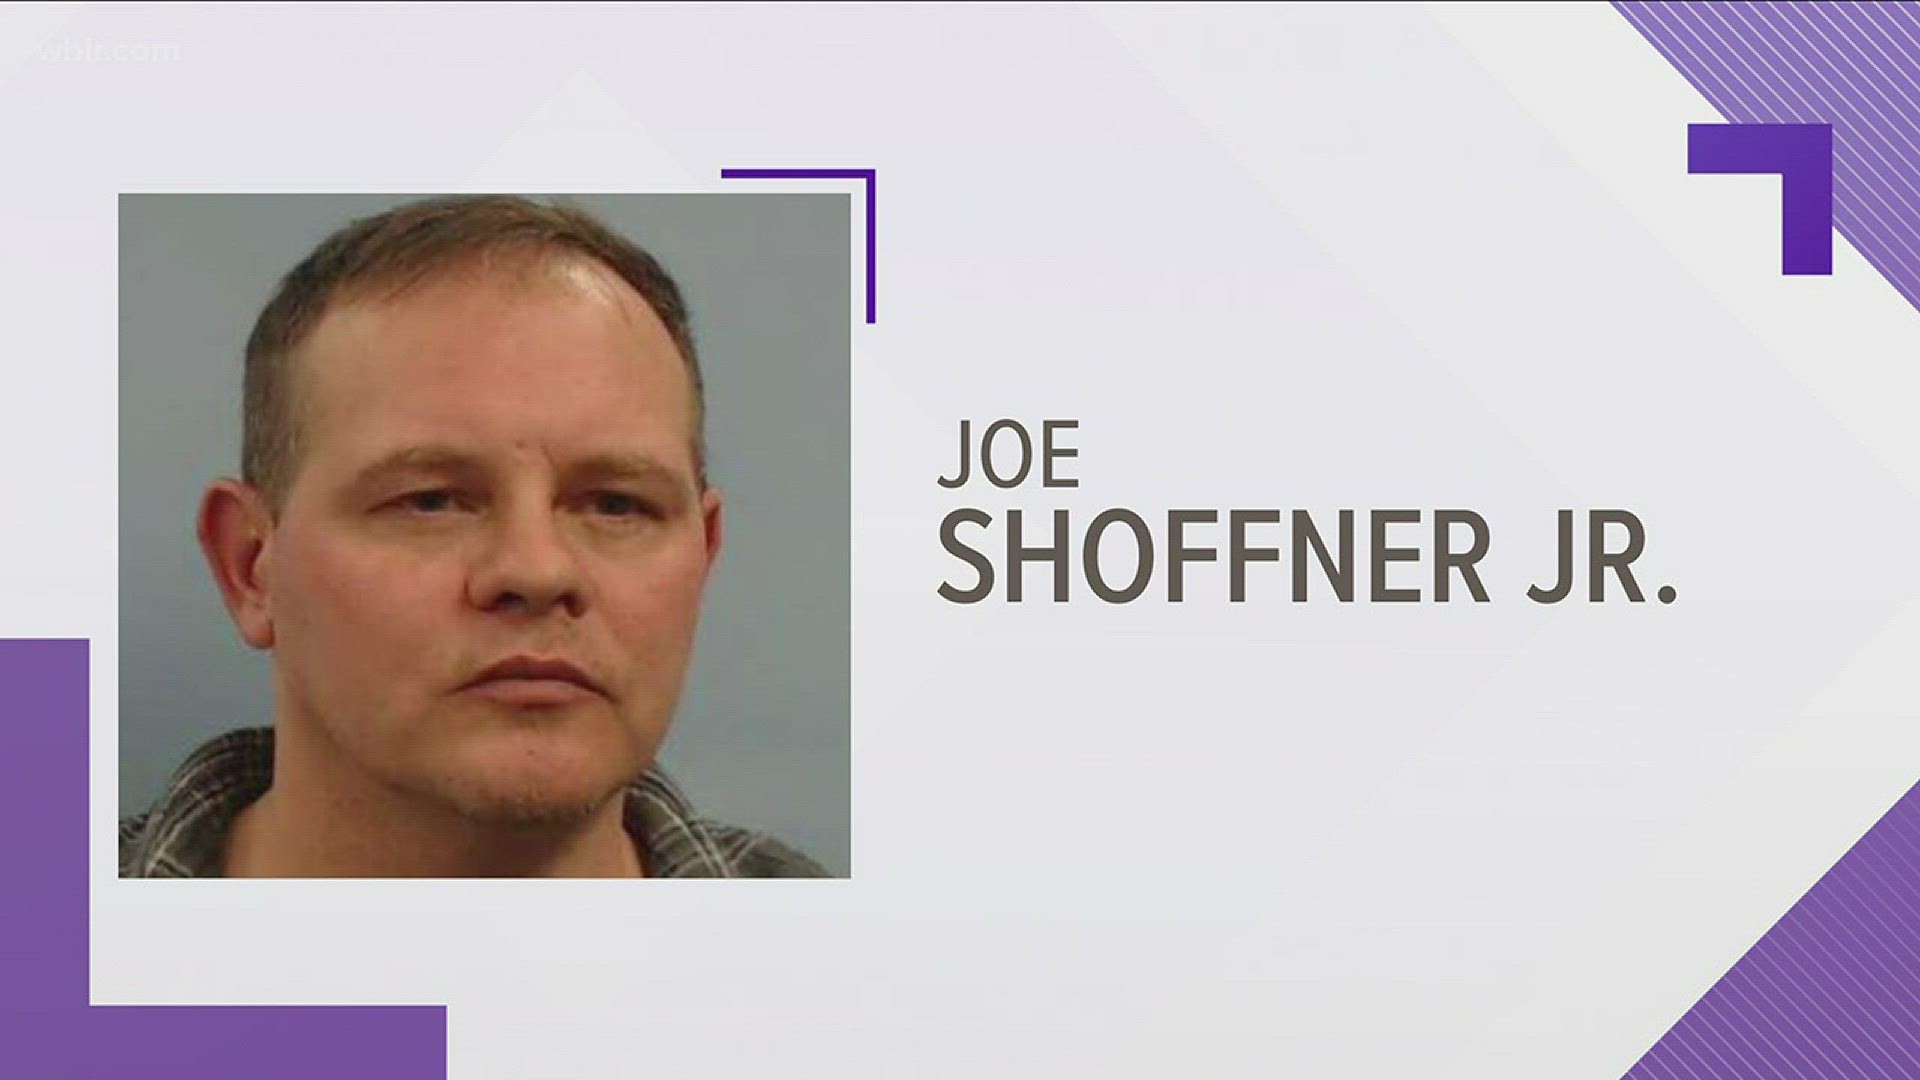 Joe Shoffner, Jr. faces the felony charge and a lesser misdemeanor count involving "extreme provocative contact," according to the Morgan County Court Clerk's Office.